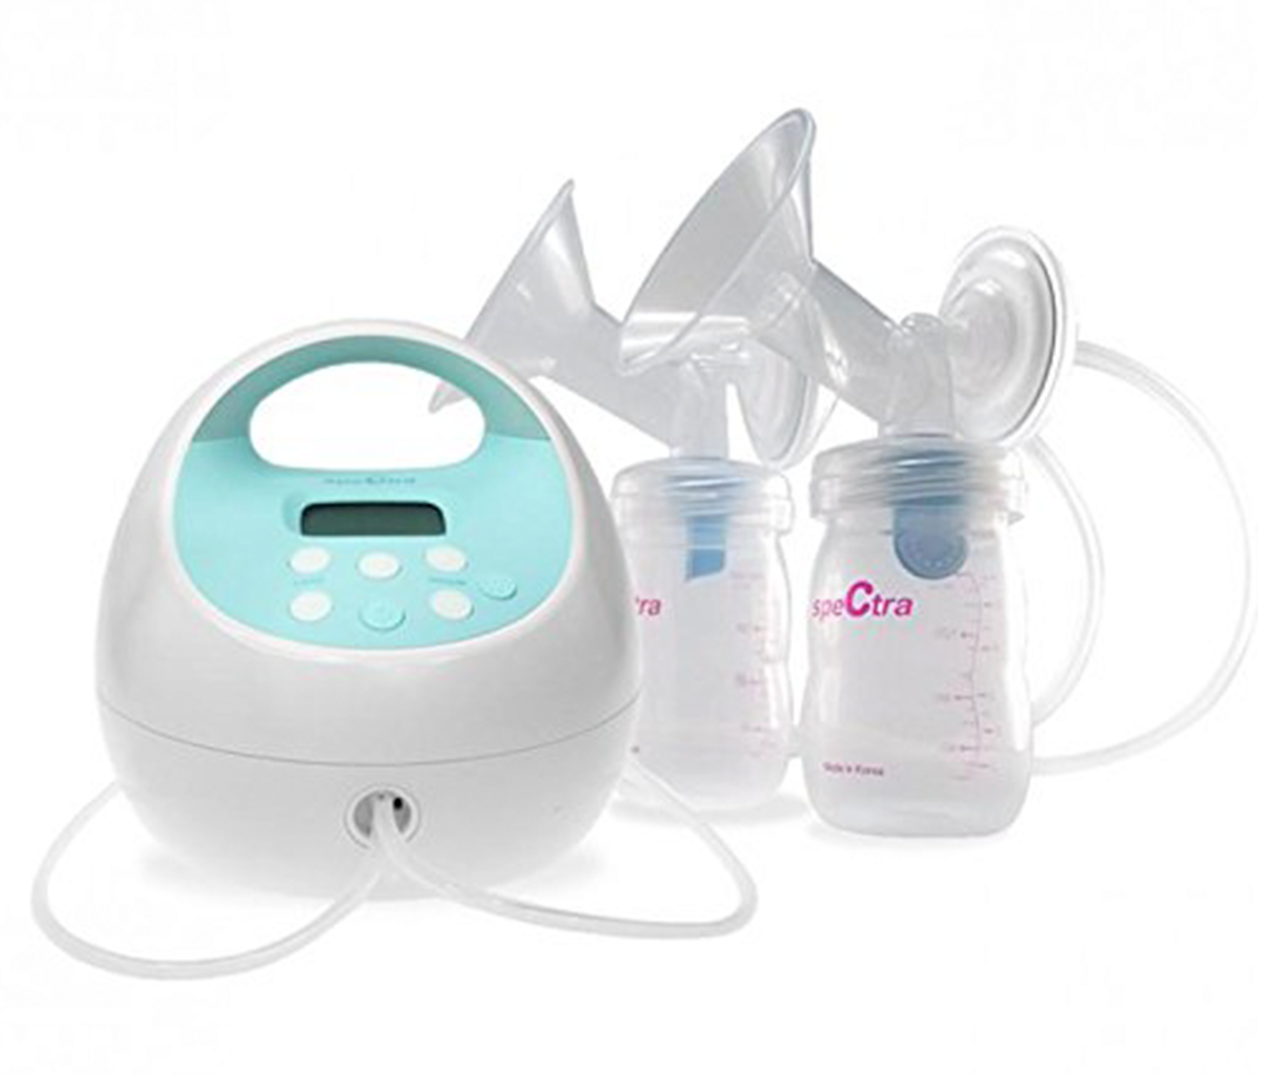 spectra s1 plus breast pump, spectra s1 with insurance, spectra s1, Spectra breast pumps, spectra pumps, insurance-covered spectra